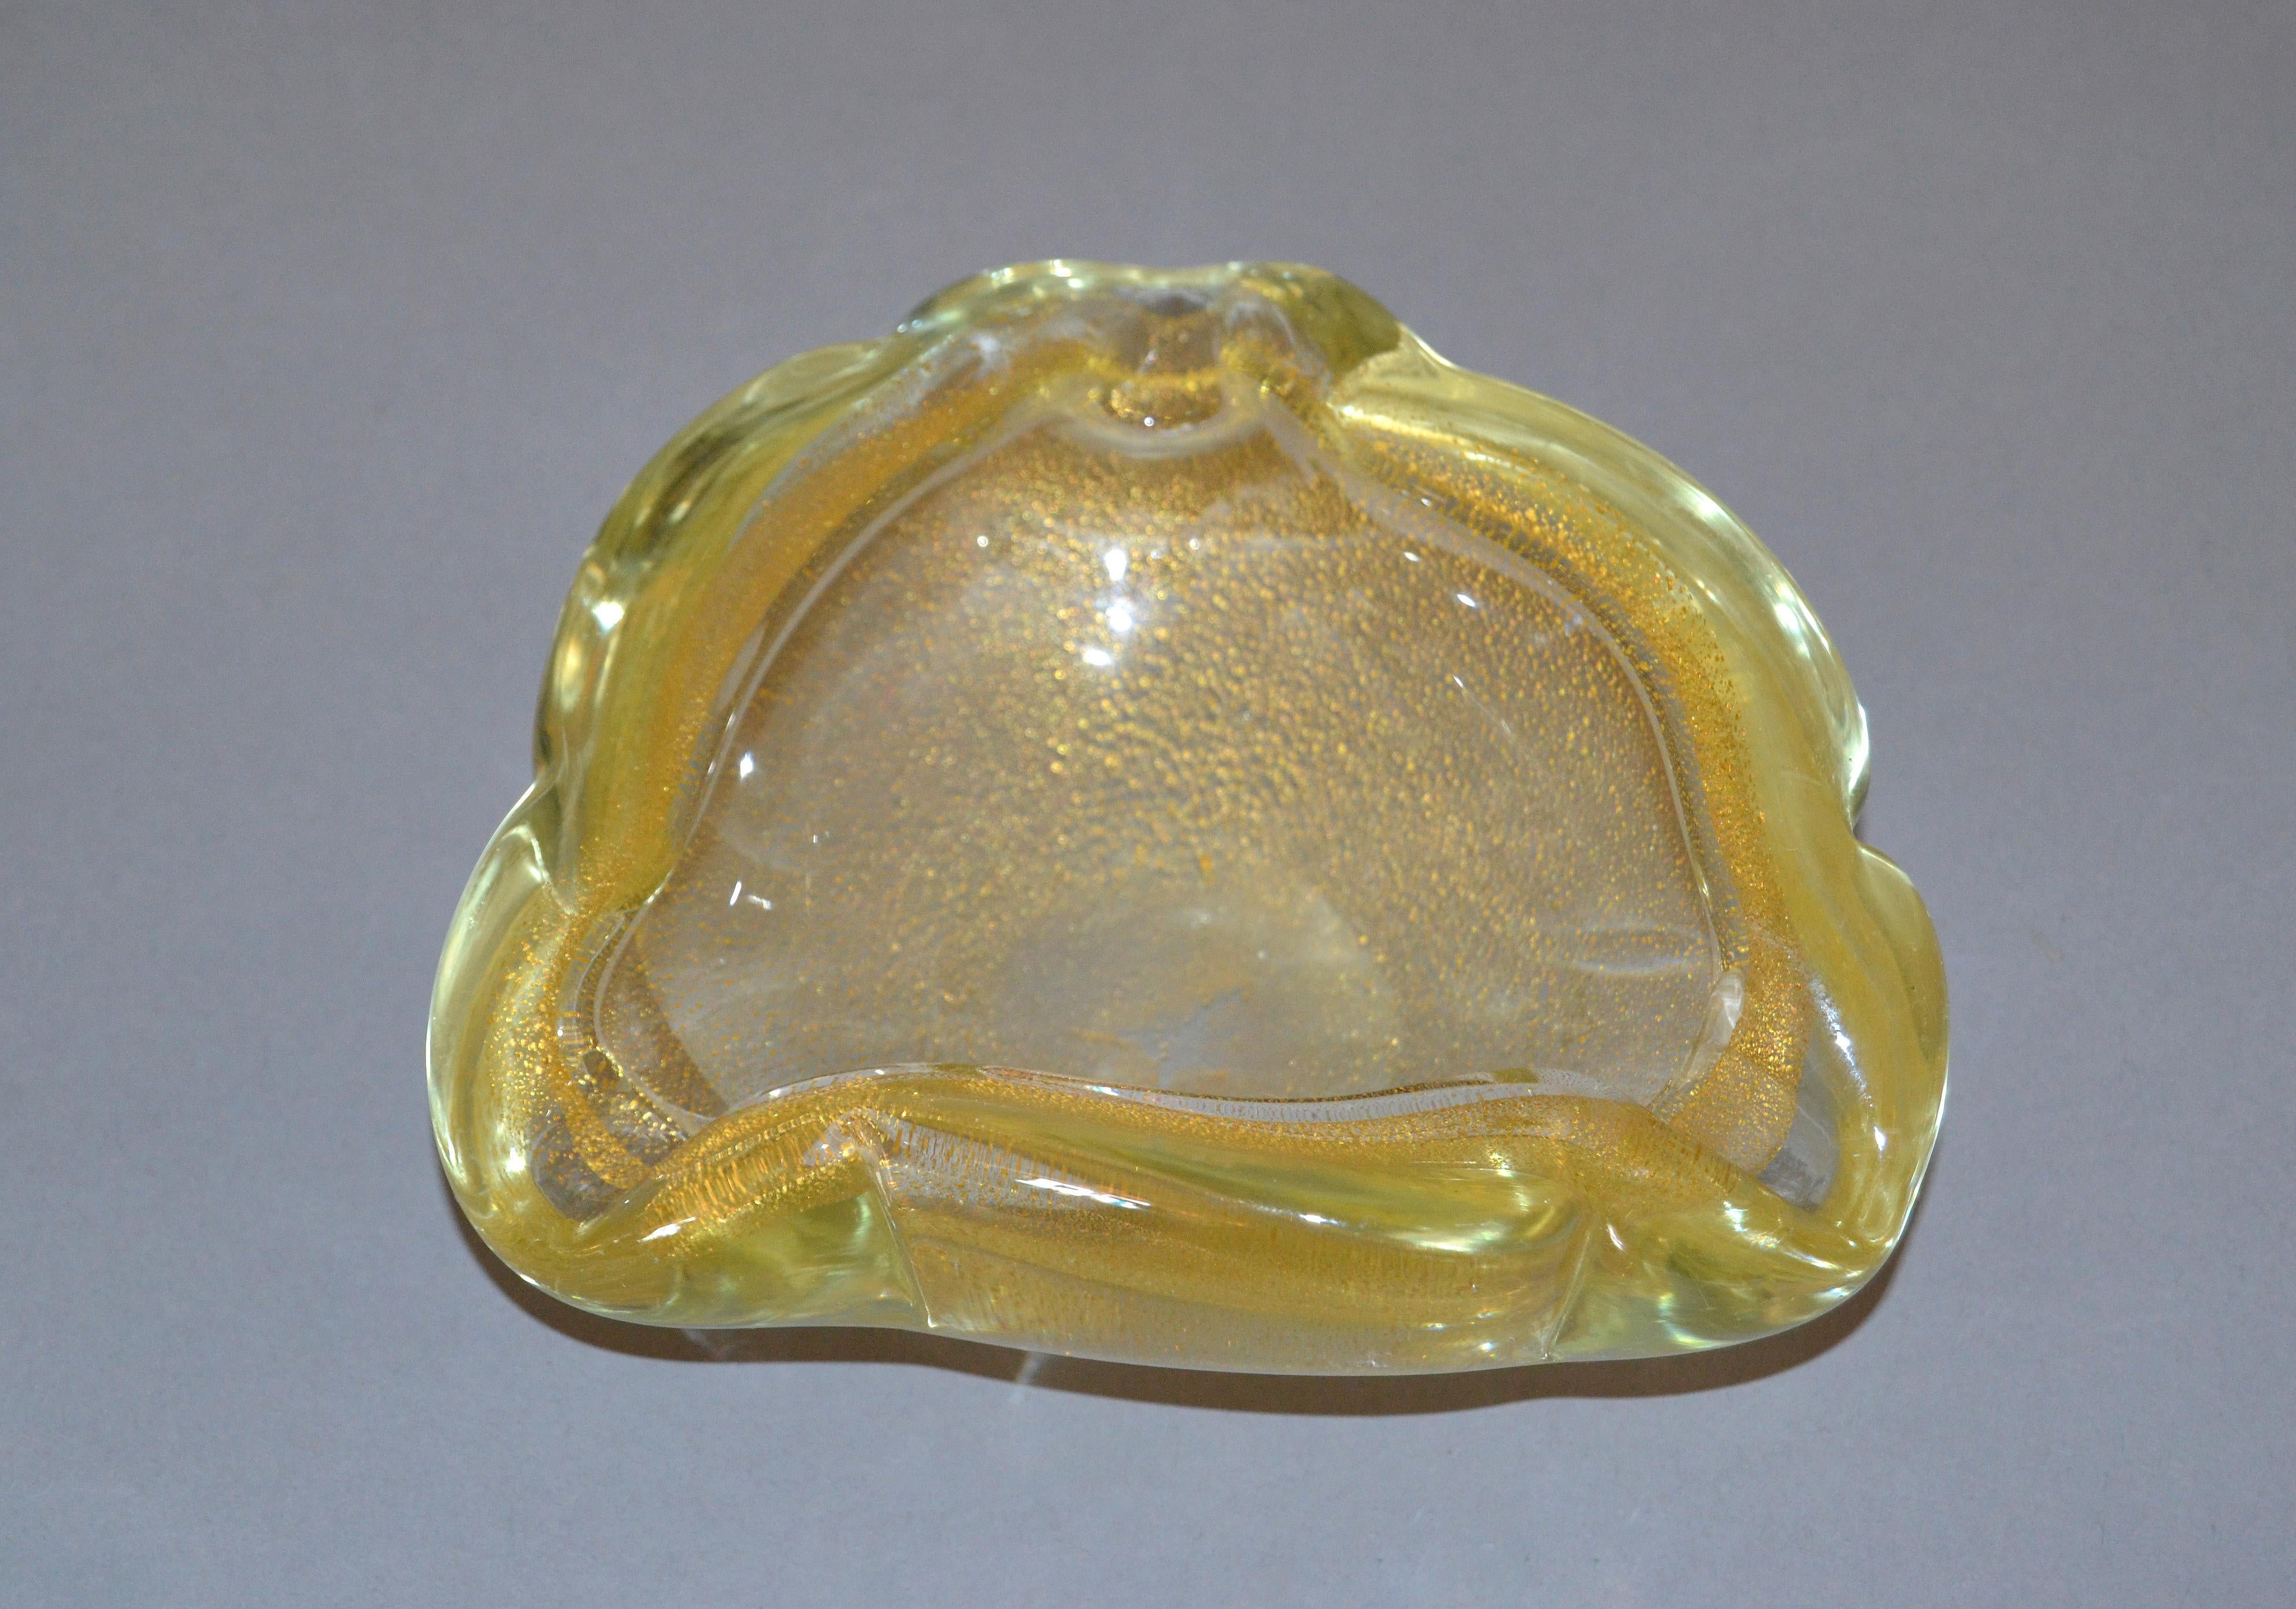 Clear Murano art glass ashtray, catchall or bowl made in Italy.
Heavy gold filled glass with gold speckled.